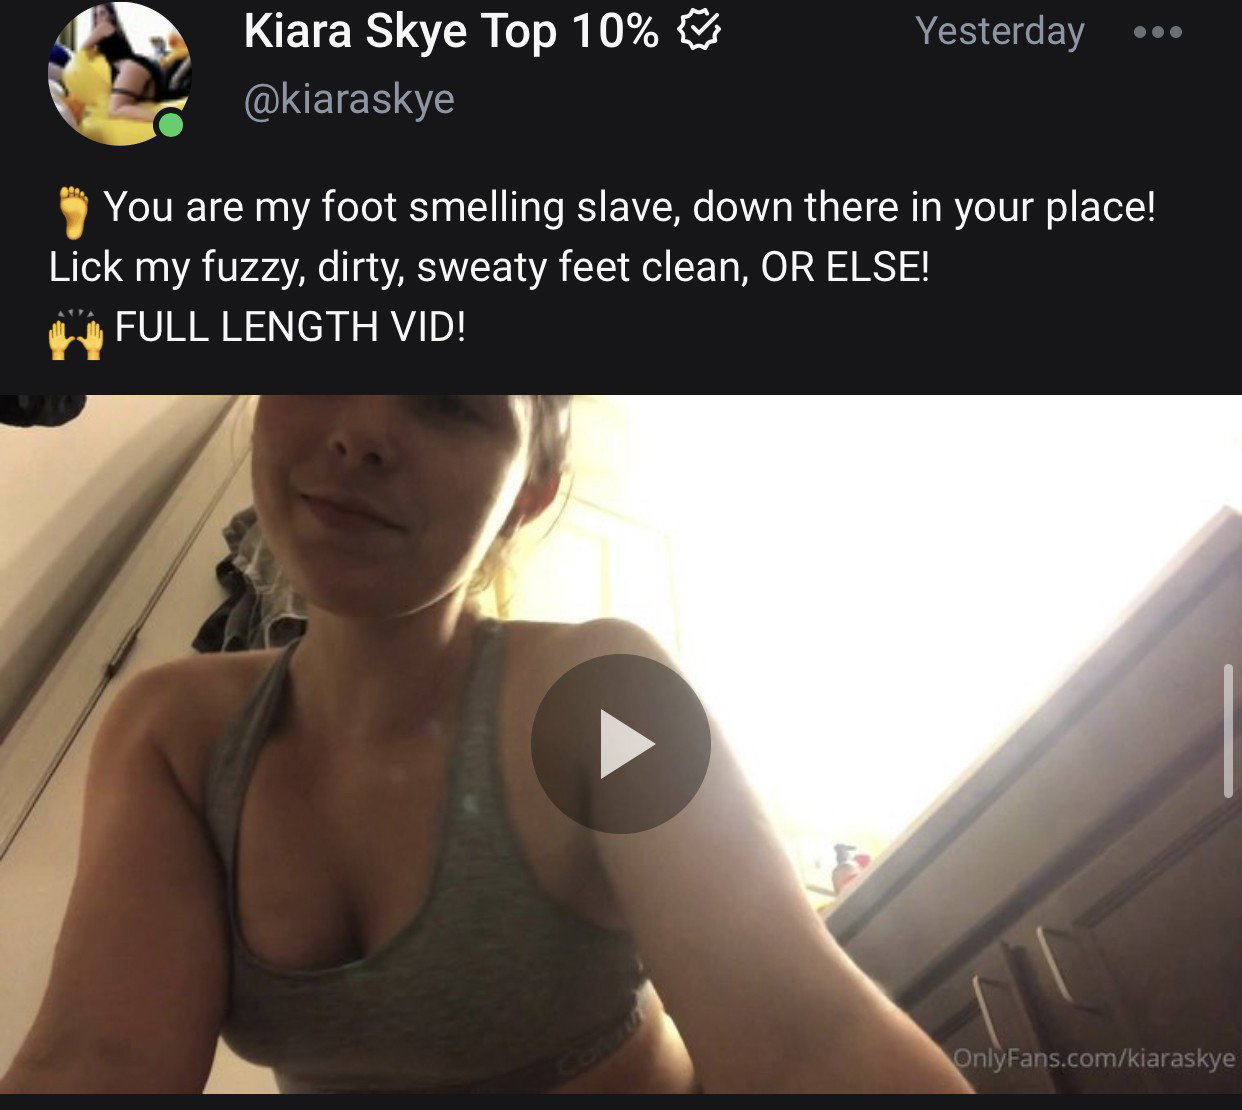 Watch the Photo by Kiara Skye with the username @KiaraSkye, who is a star user, posted on July 10, 2020. The post is about the topic Foot Fetish. and the text says 'Have you seen this EXCLUSIVE video I made JUST for my most loyal fans?! 🤓 You know where to find my links! 


#feet #soles #stinkyfeet #smellyfeet #socks #wornsocks #stinkysocks #toejam #toes #footslave #lickingfeet #footfetish #goddess #femdom..'